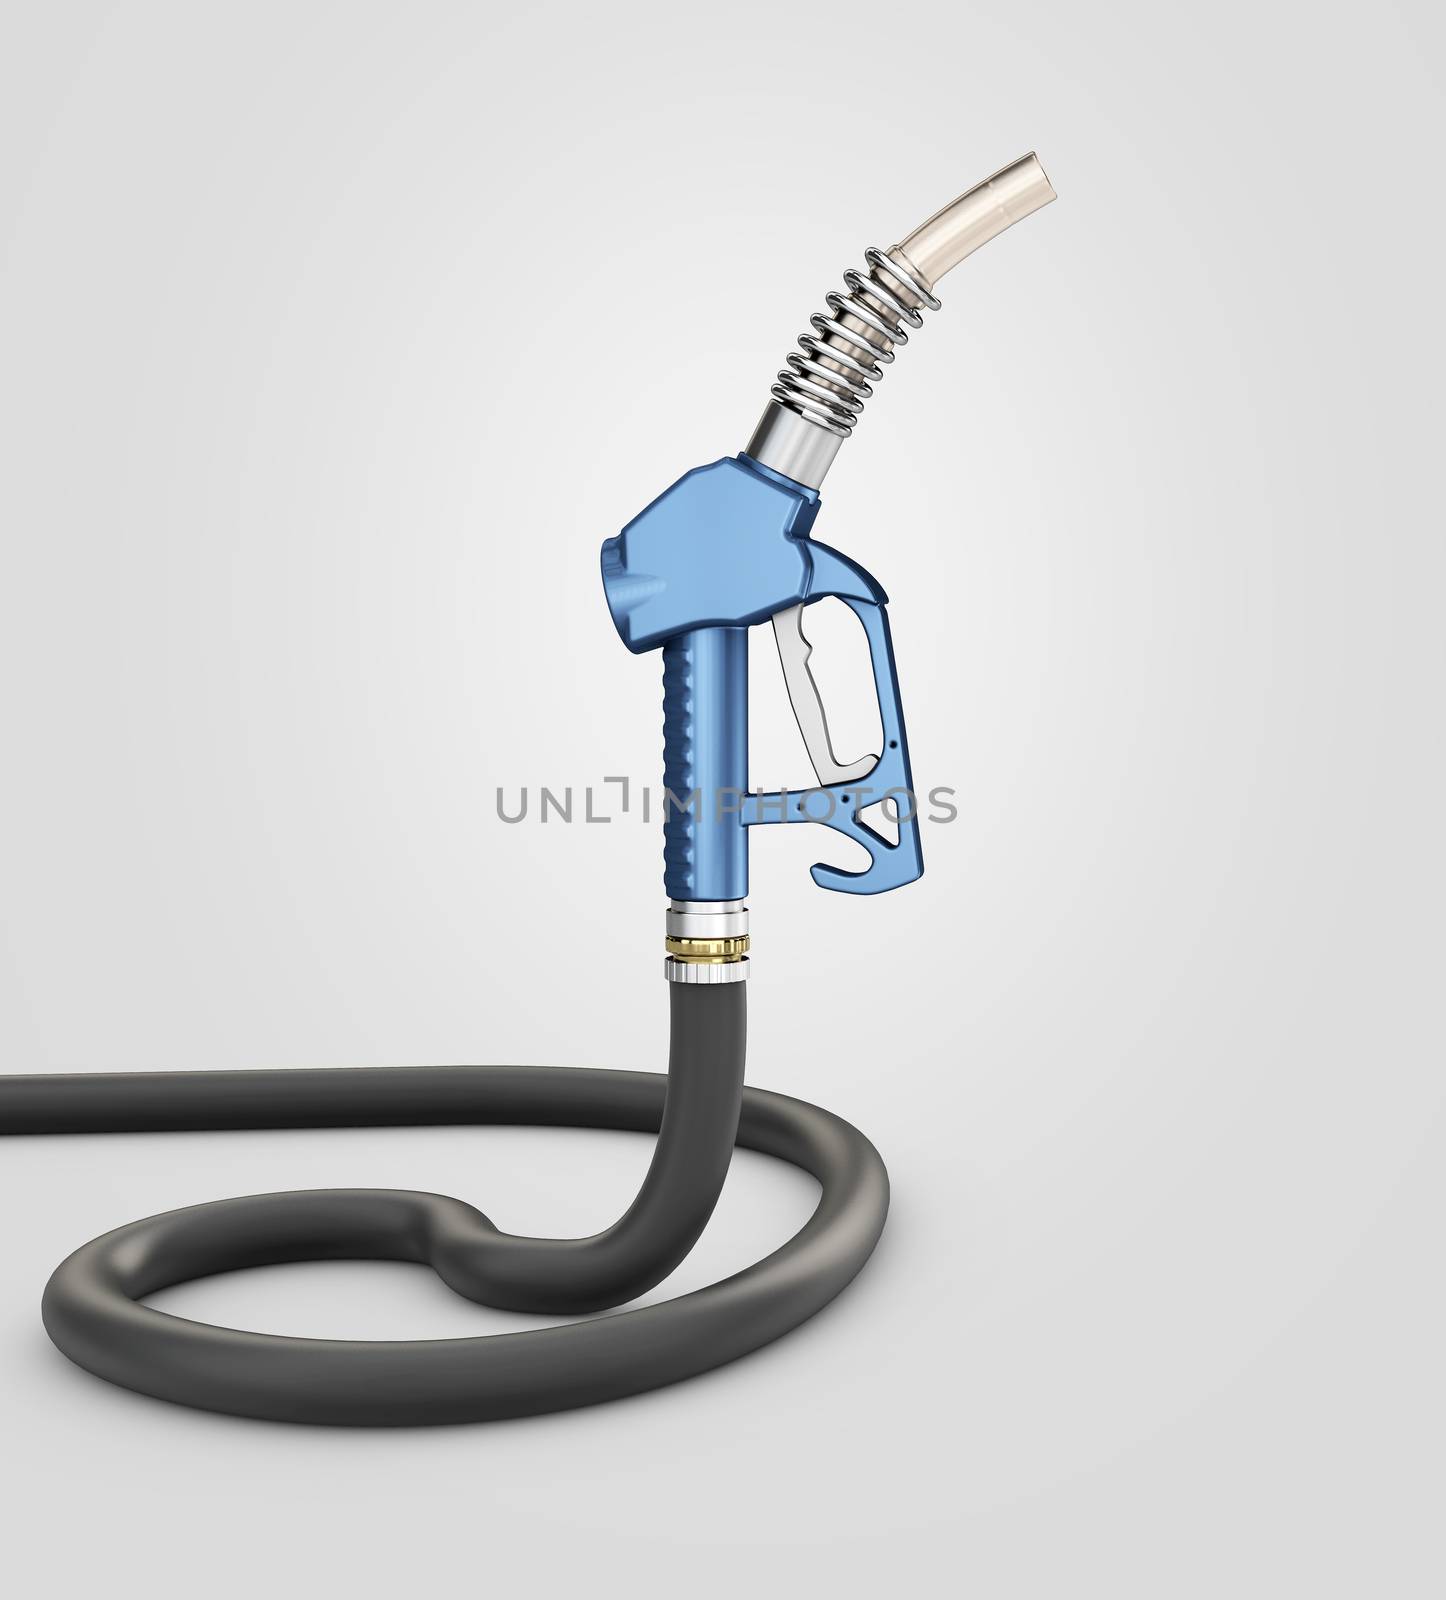 3d rendering of Fuel petrol gun, clipping path include.